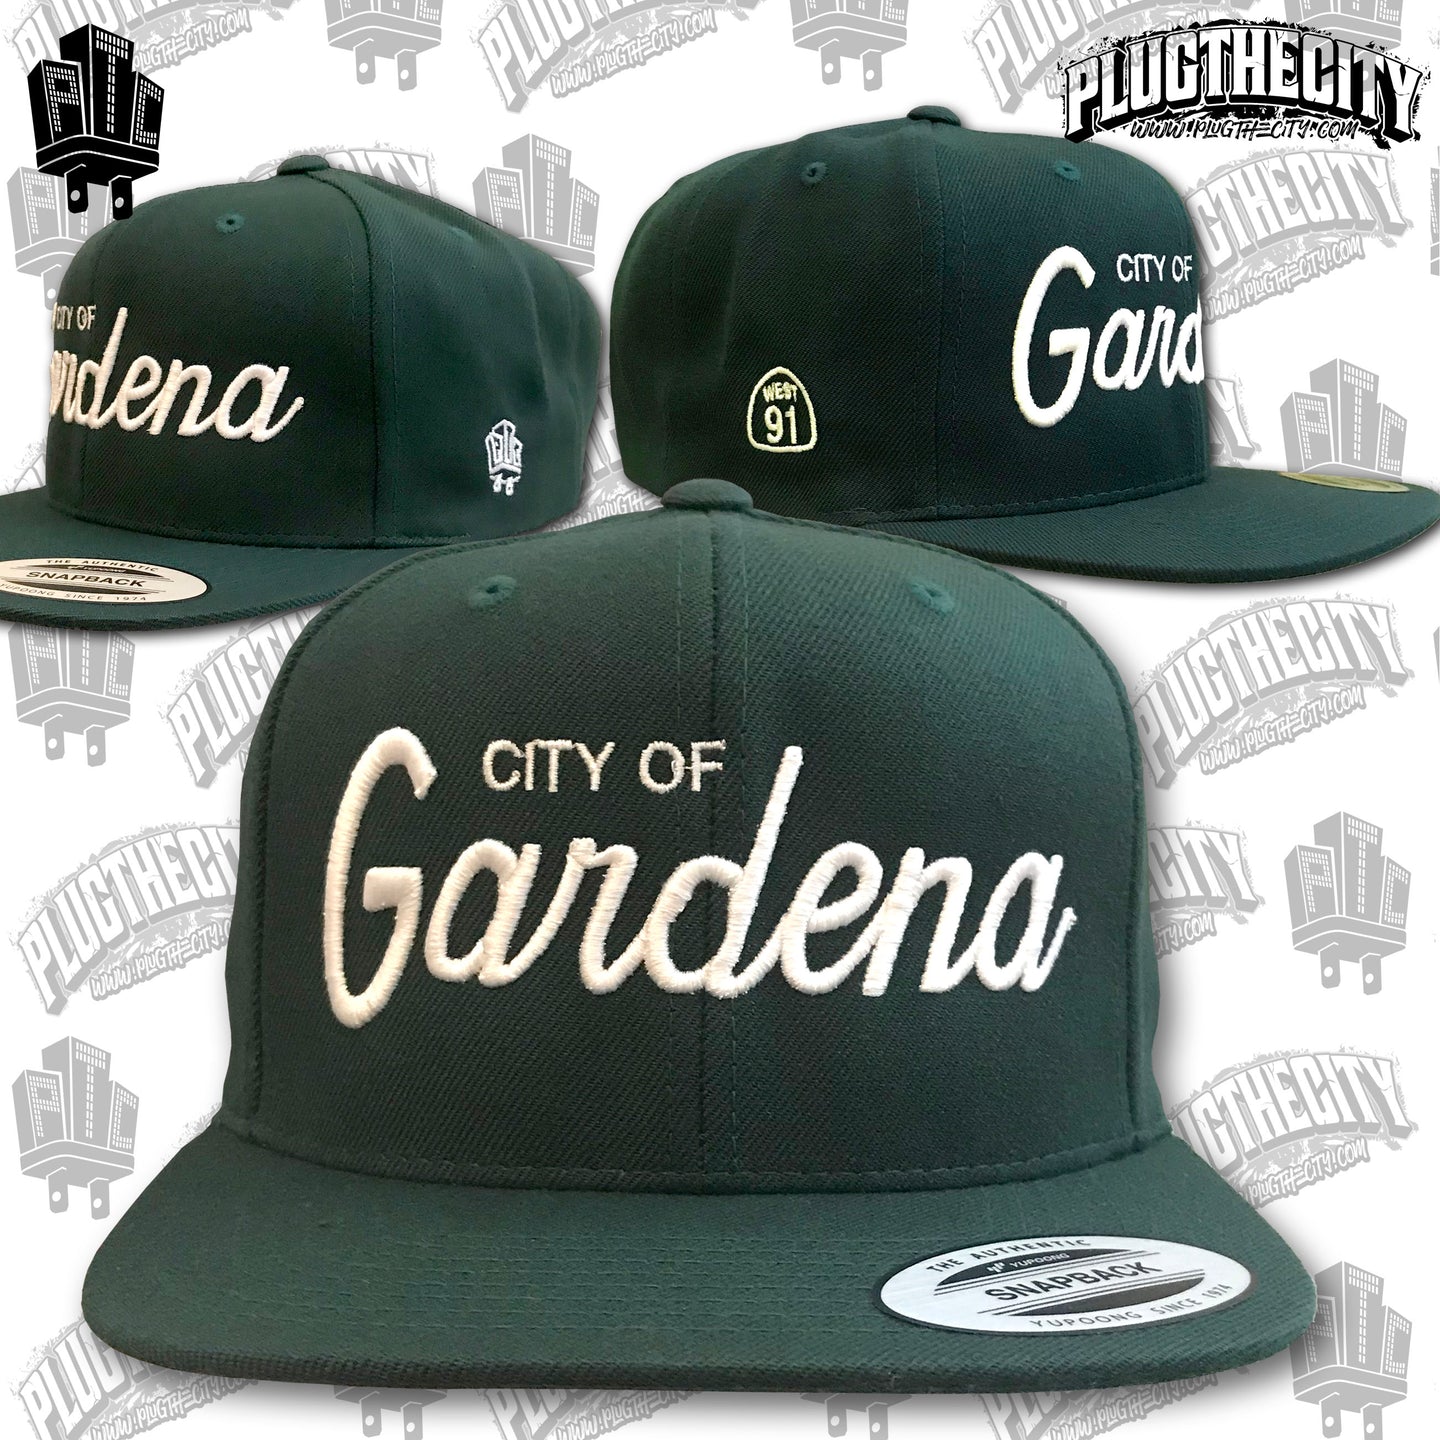 City of Gardena-91West & PTC logos on the side of snapback baseball hat-Color:GREEN